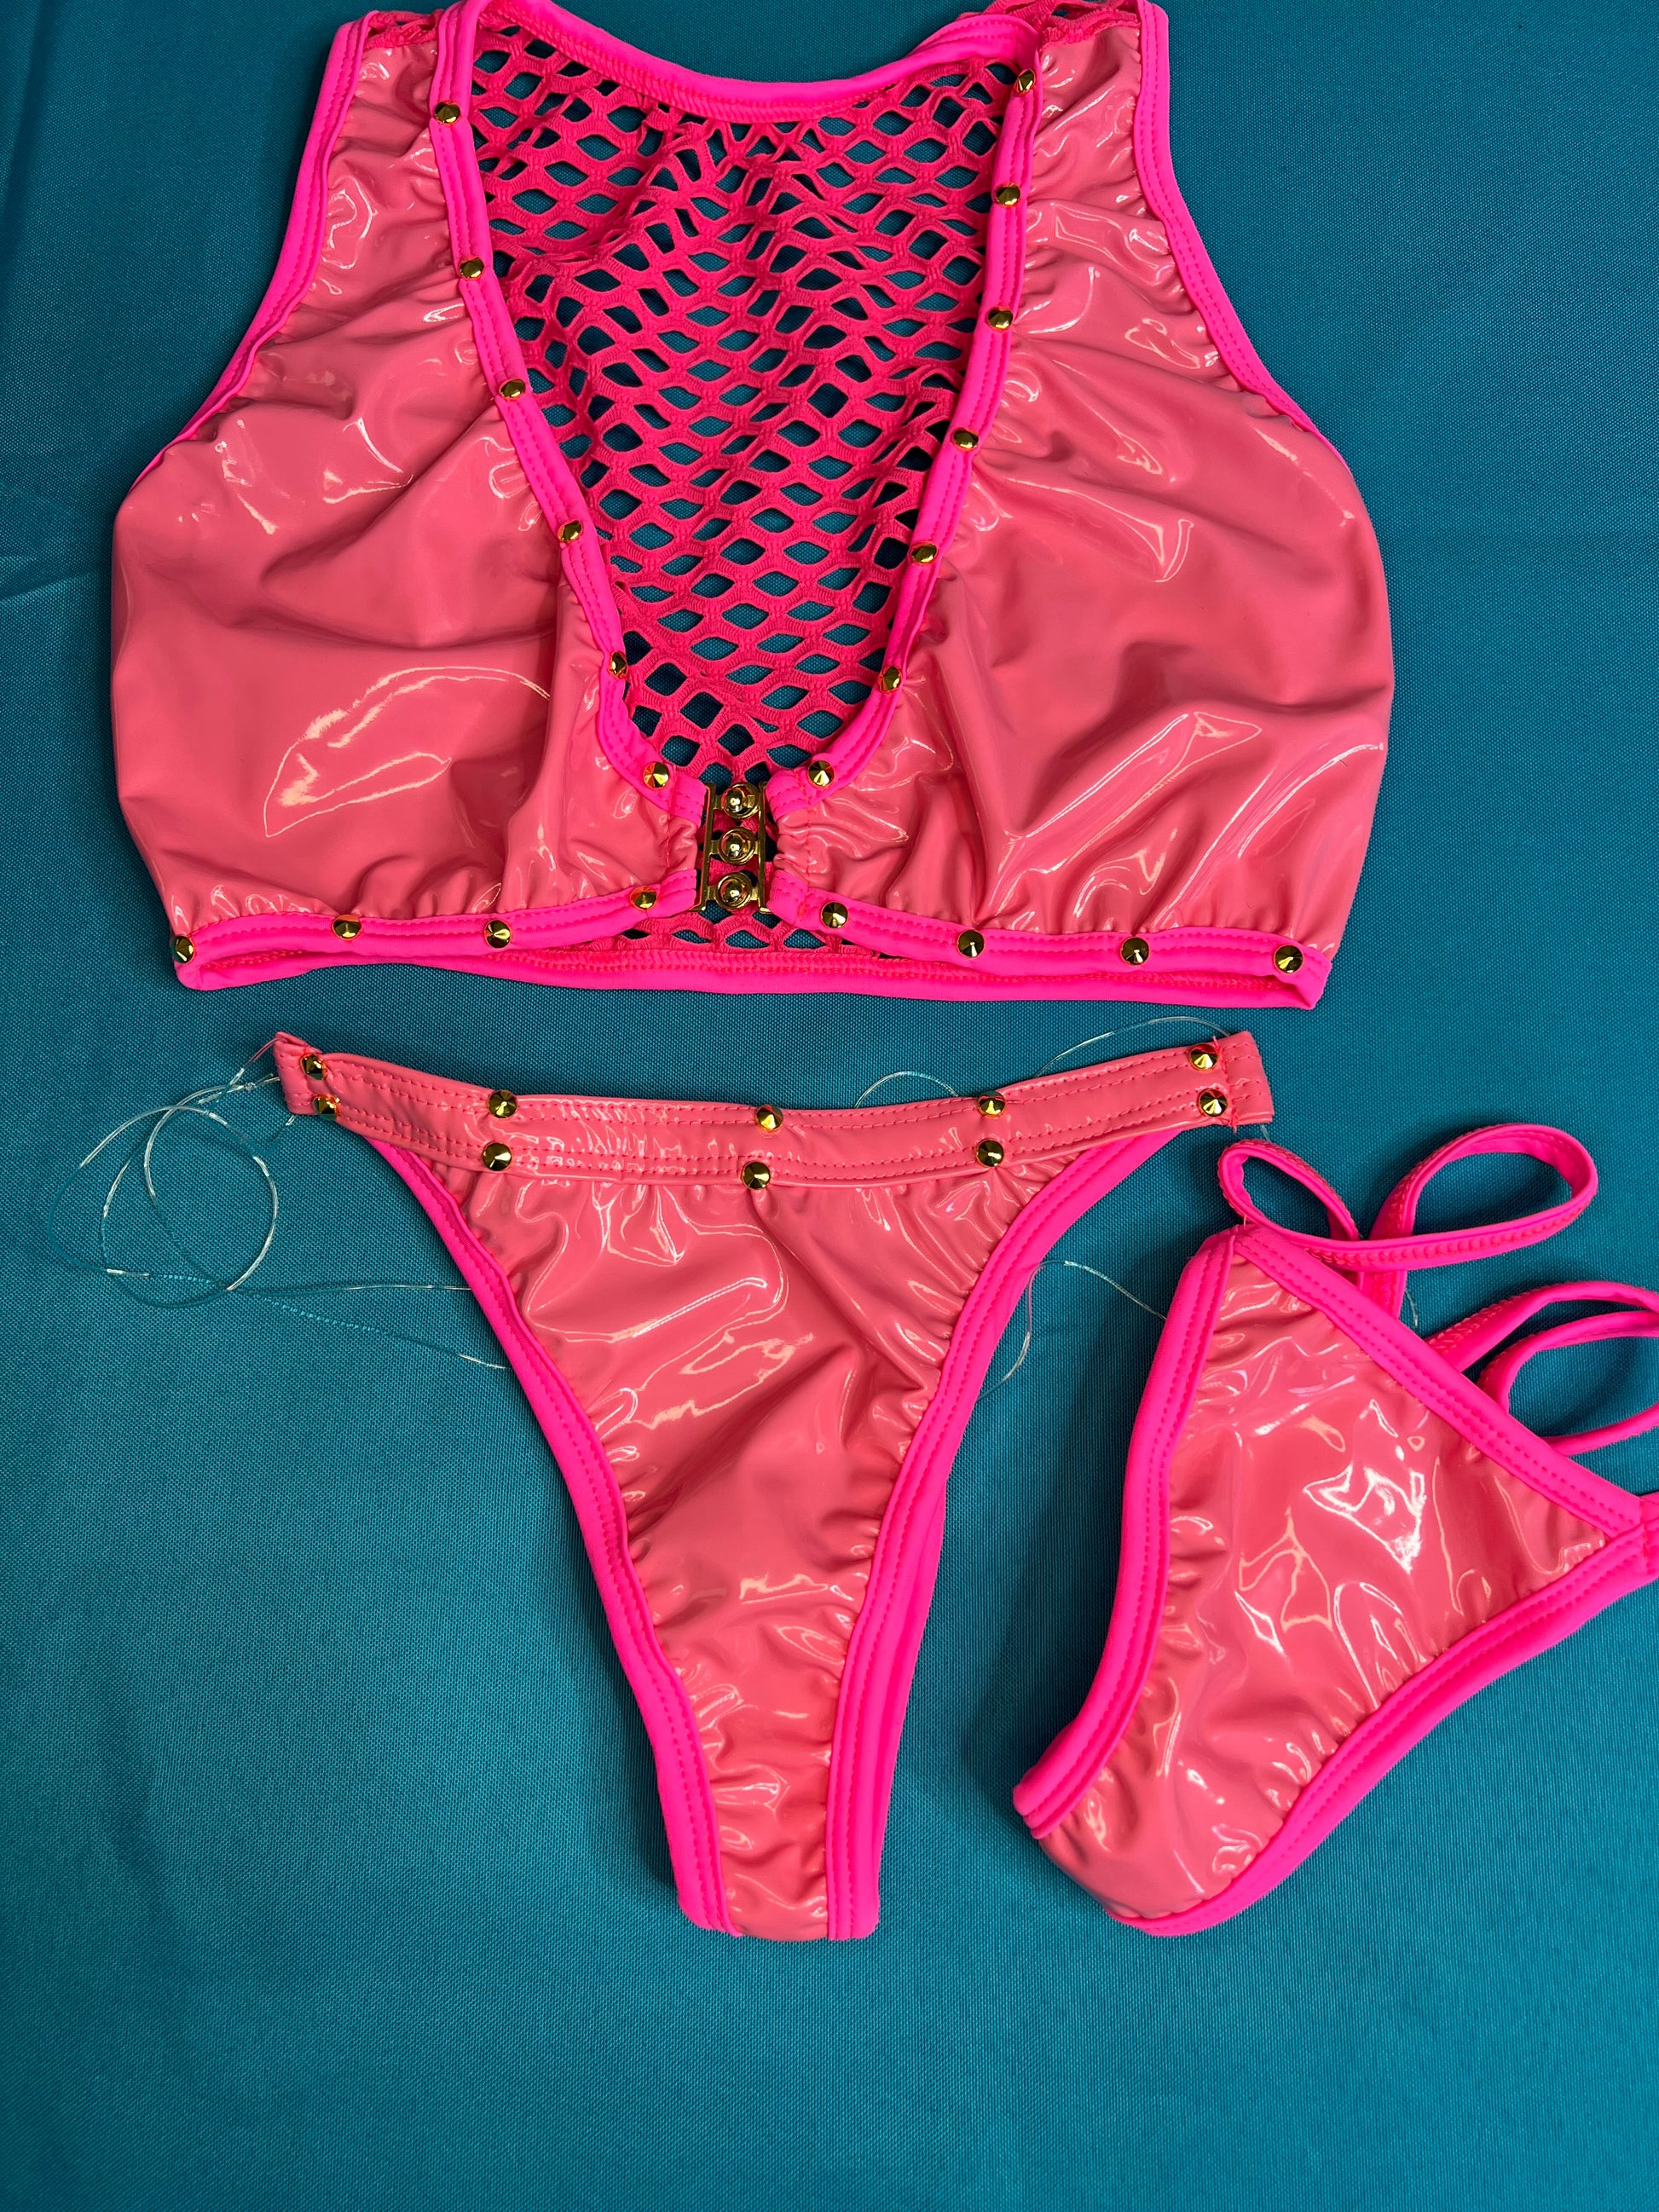 Exotic Dance Wear Two-Piece Baby Pink Latex Outfit Stripper Attire